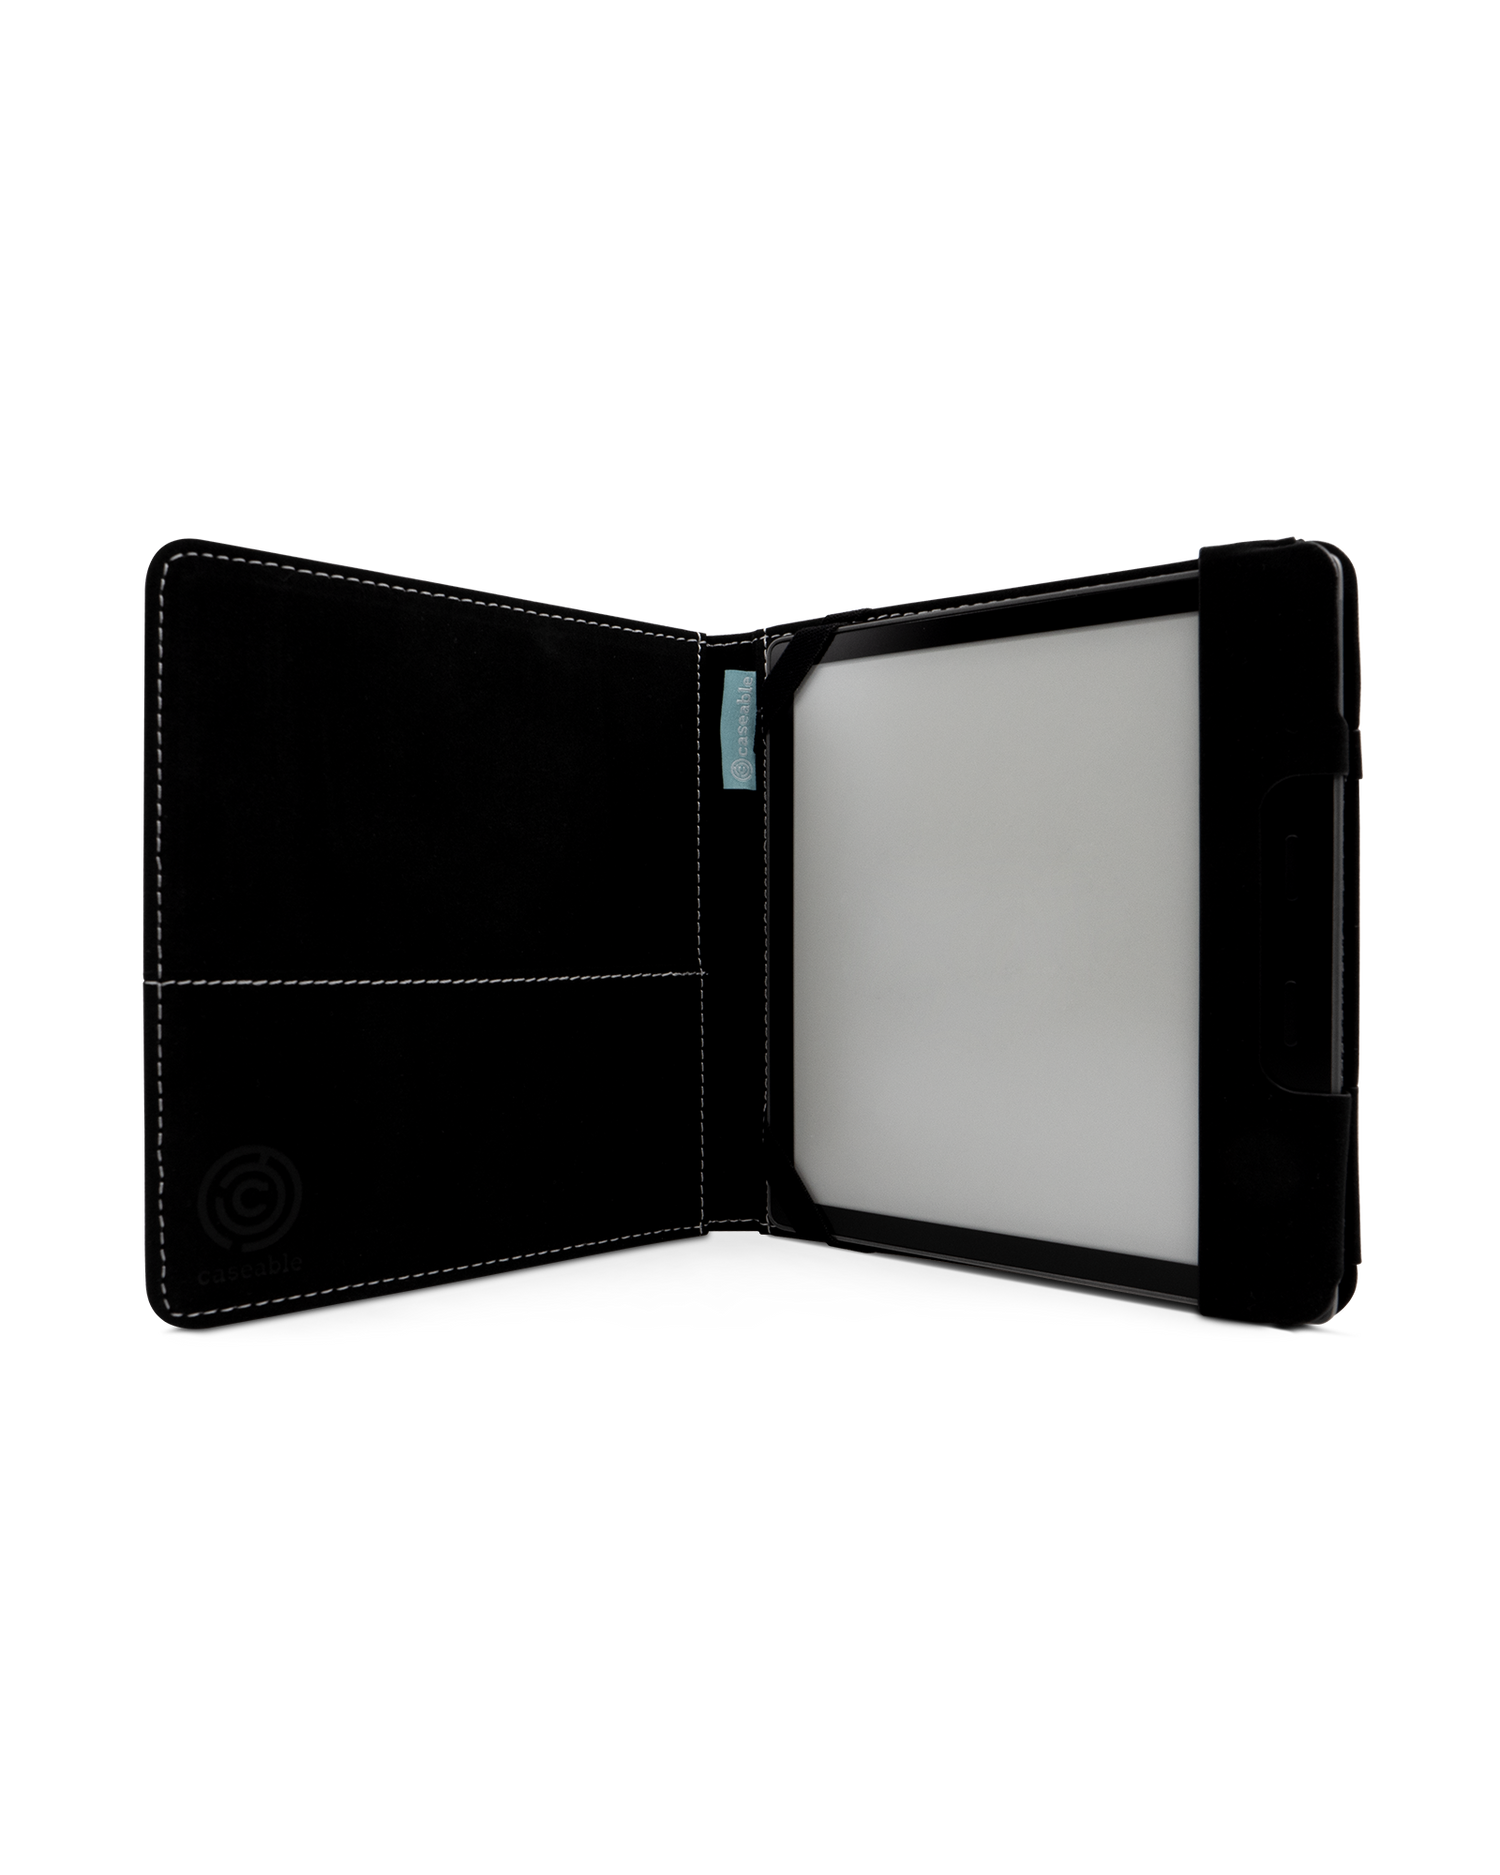 Flower Field eReader Case for tolino vision 6: Opened interior view